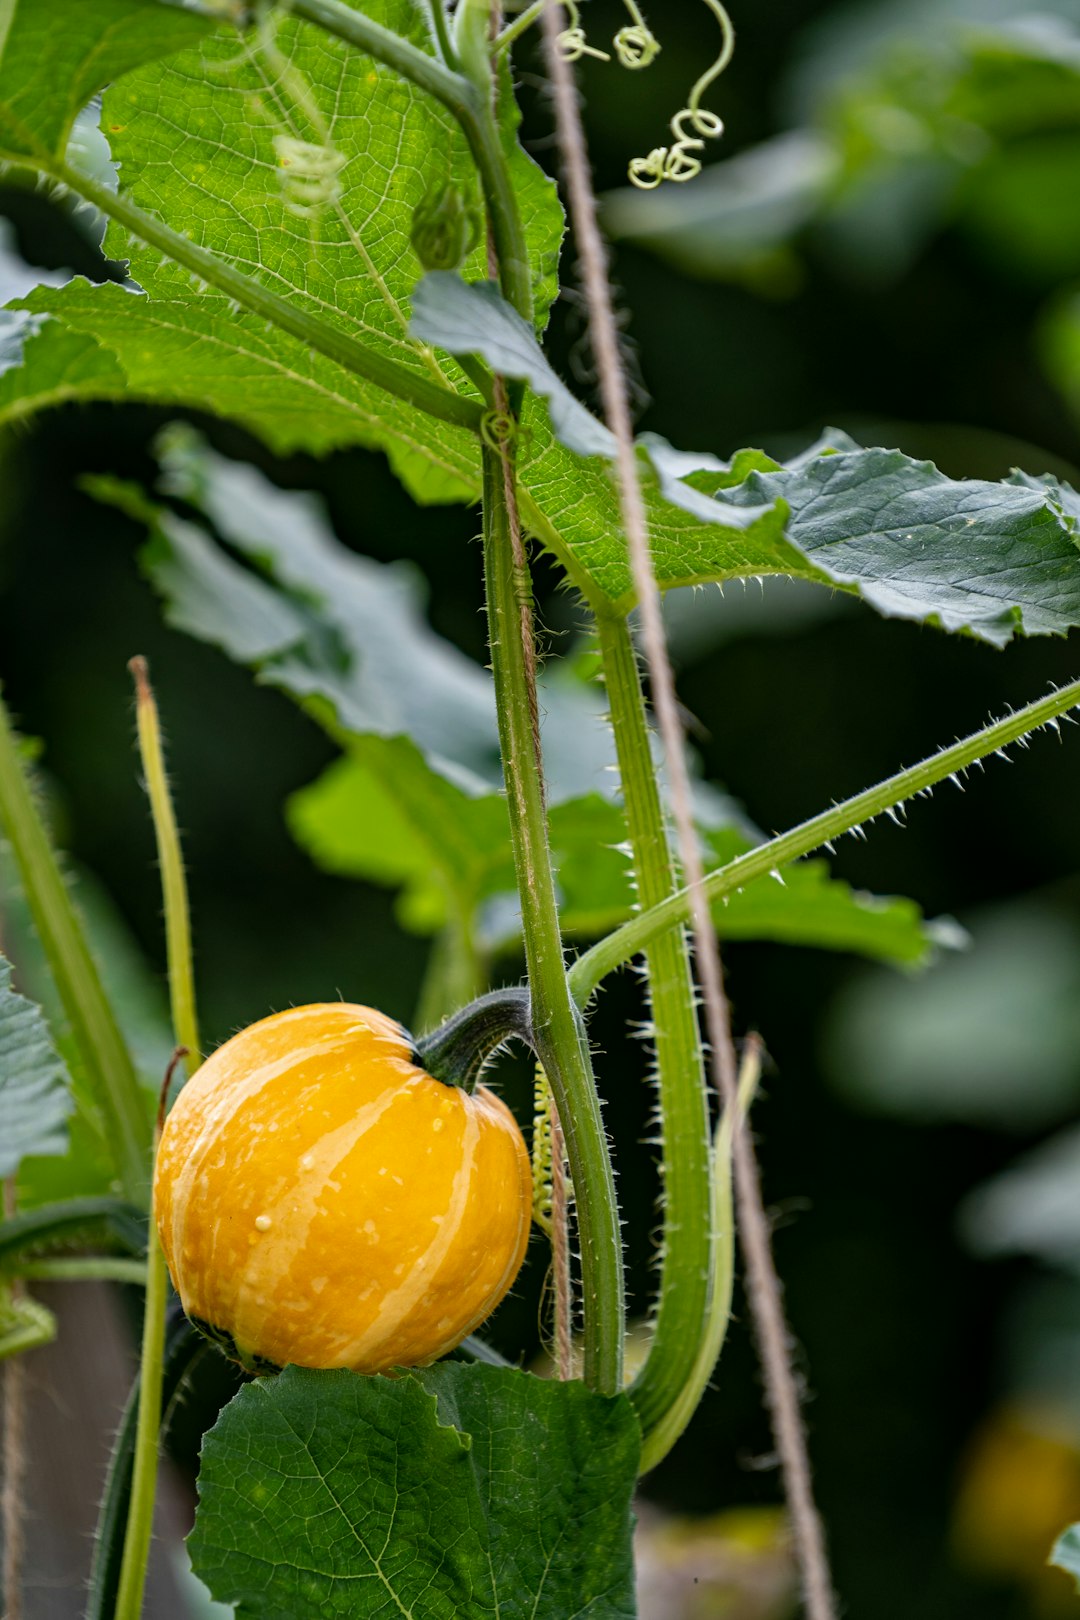 yellow round fruit on green leaf